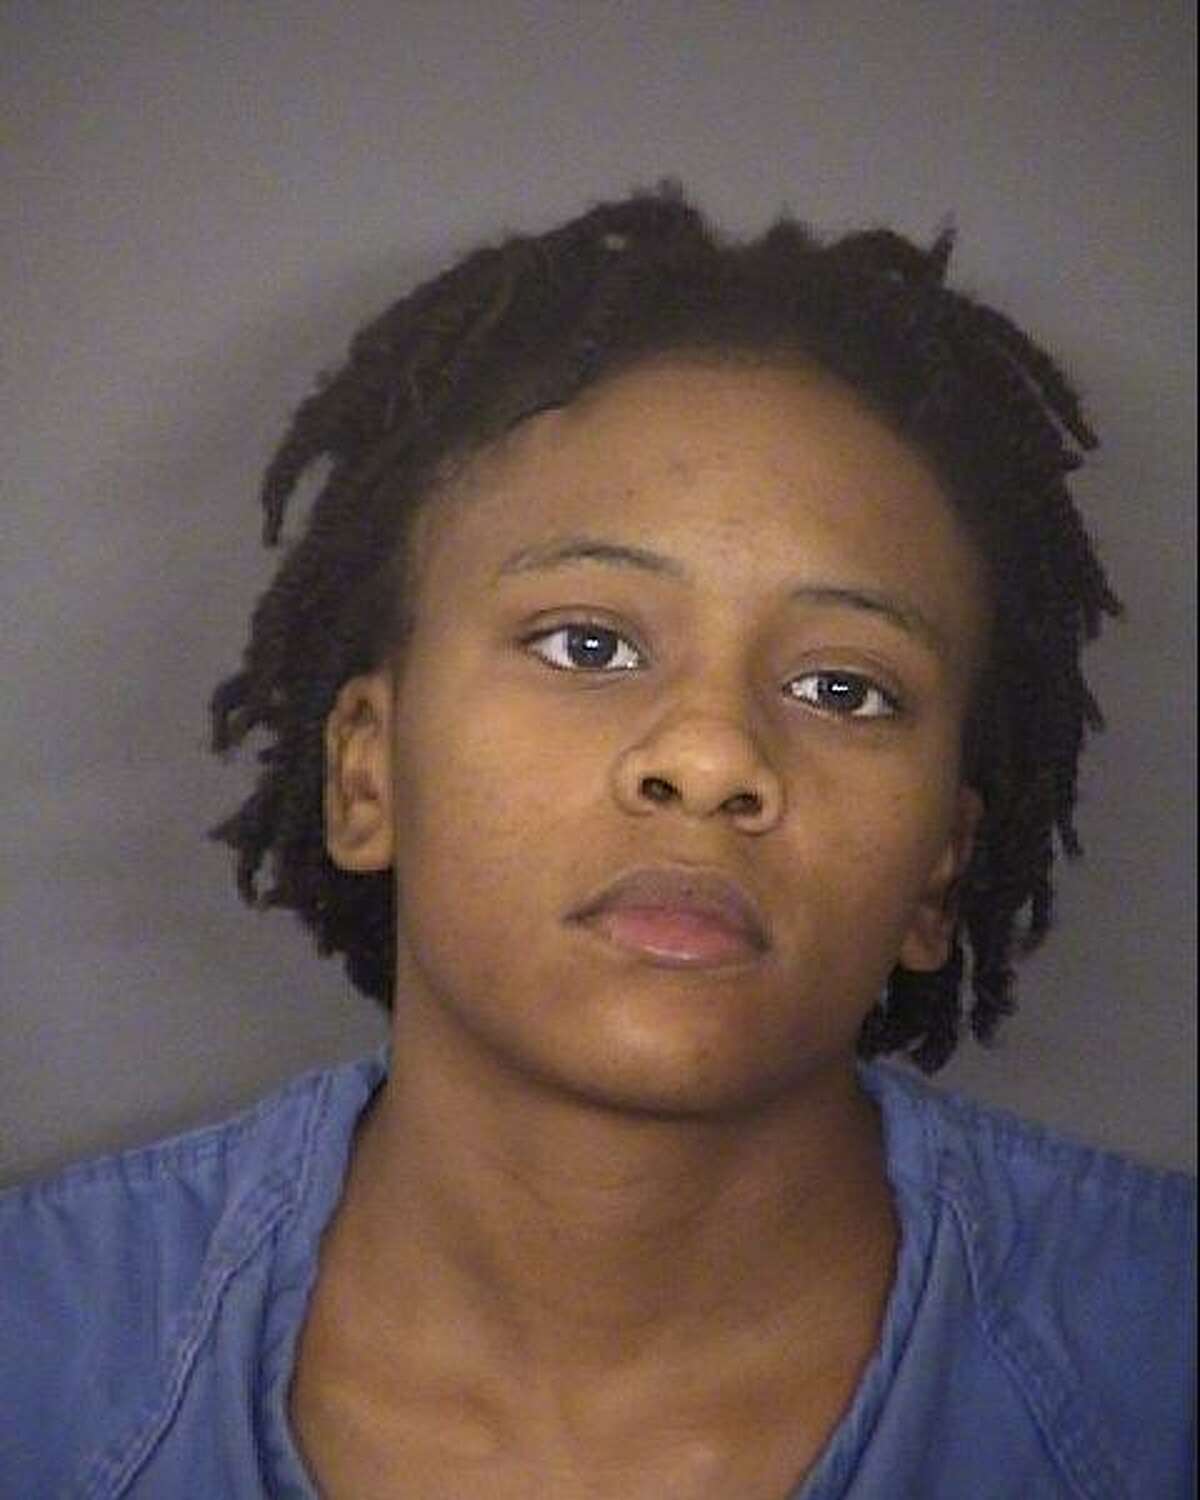 Grace Seward, 22, was arrested Thursday in connection with a shooting at Wagner High School, according to the Bexar County Sheriff's Office.